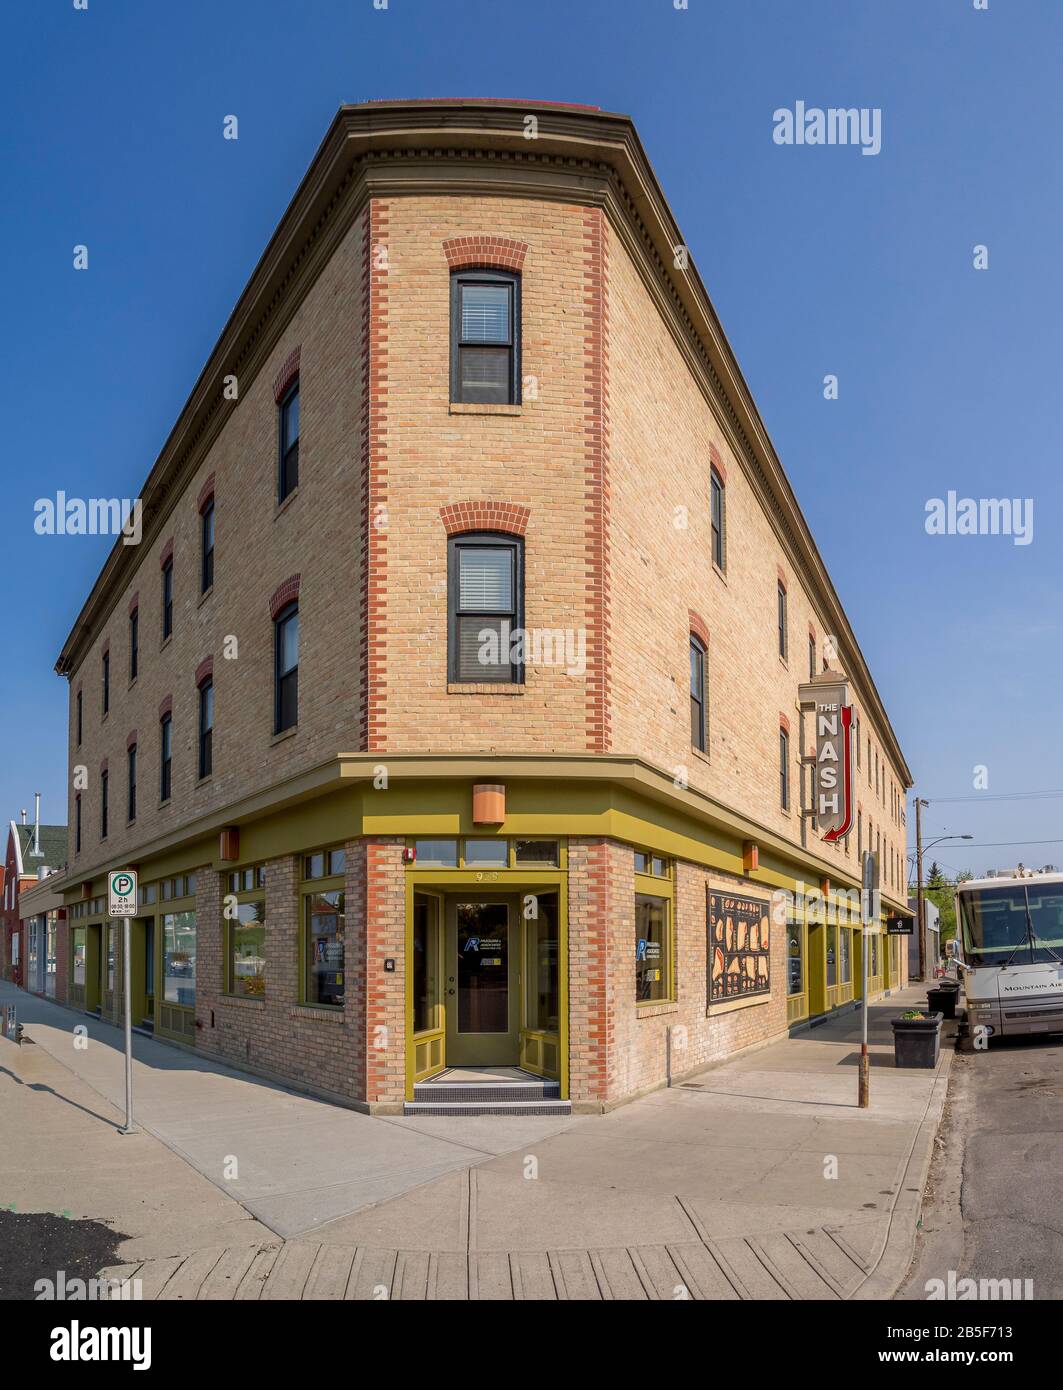 The Nash Restaurant and bar on May 24, 2015 in Calgary, Alberta. The Nash is a popular dining establishment in the hip Inglewood district. Stock Photo